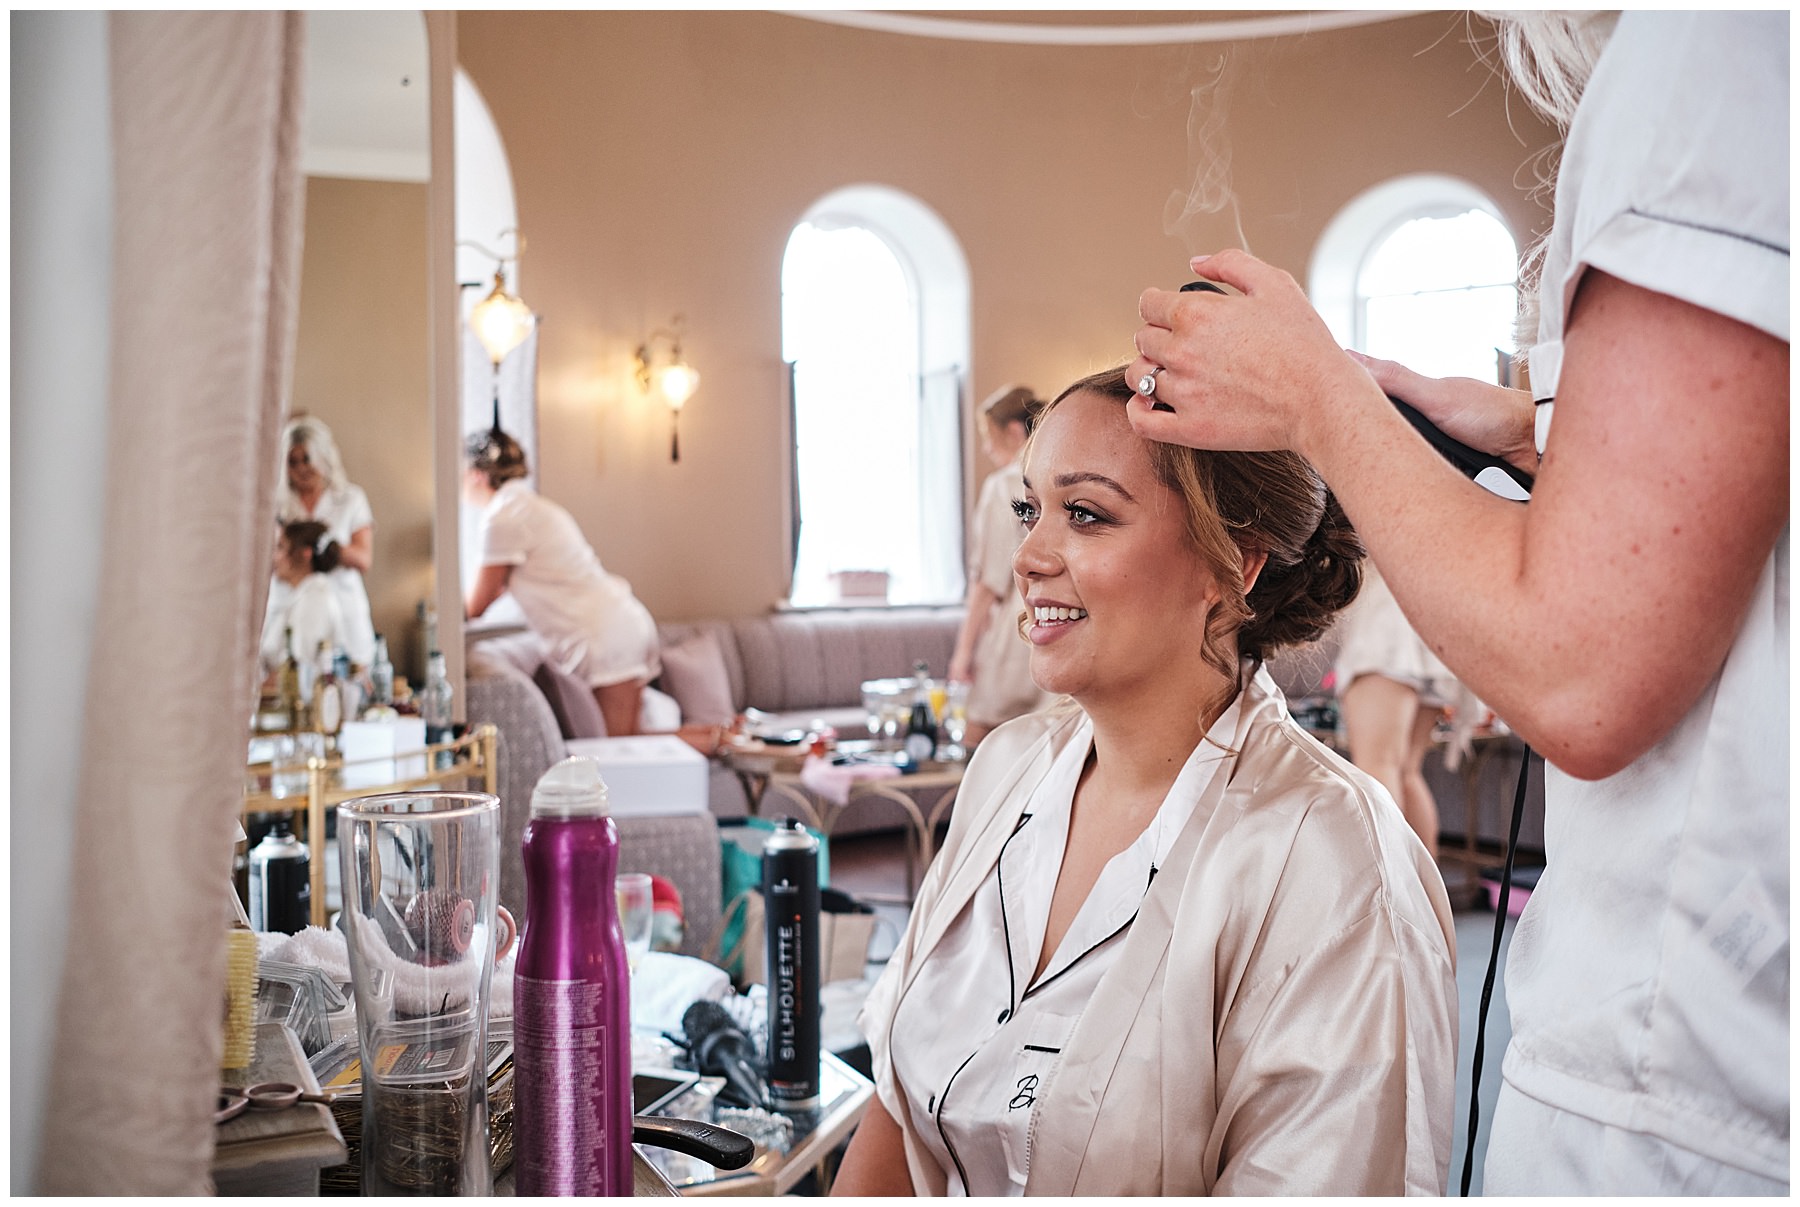 Capturing the wedding morning preparations for the bridal party at Hawkstone Hall in Shrewsbury by Documentary Wedding Photographer Stuart James